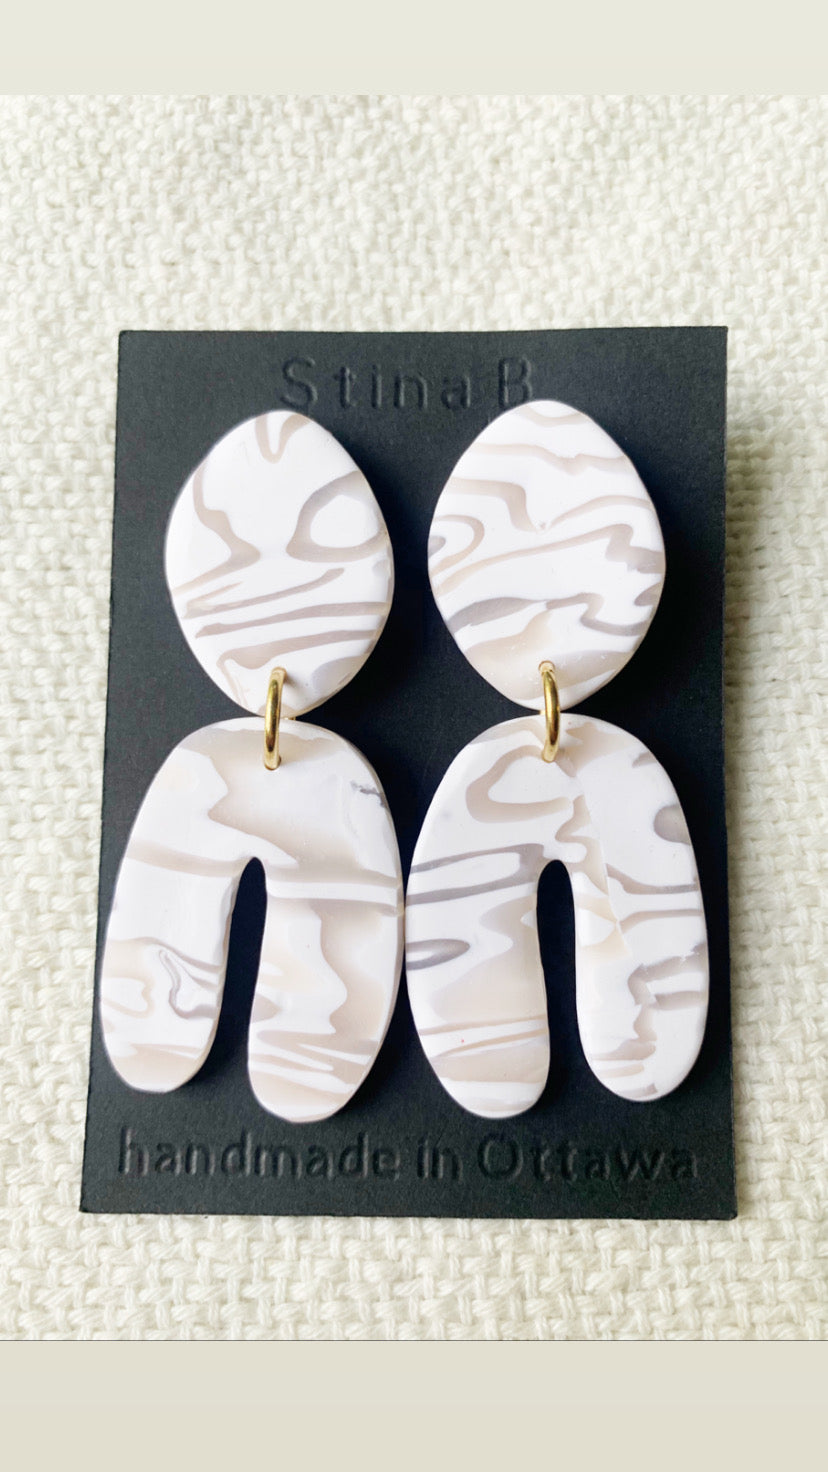 Wood grain White and Translucent polymer clay earrings